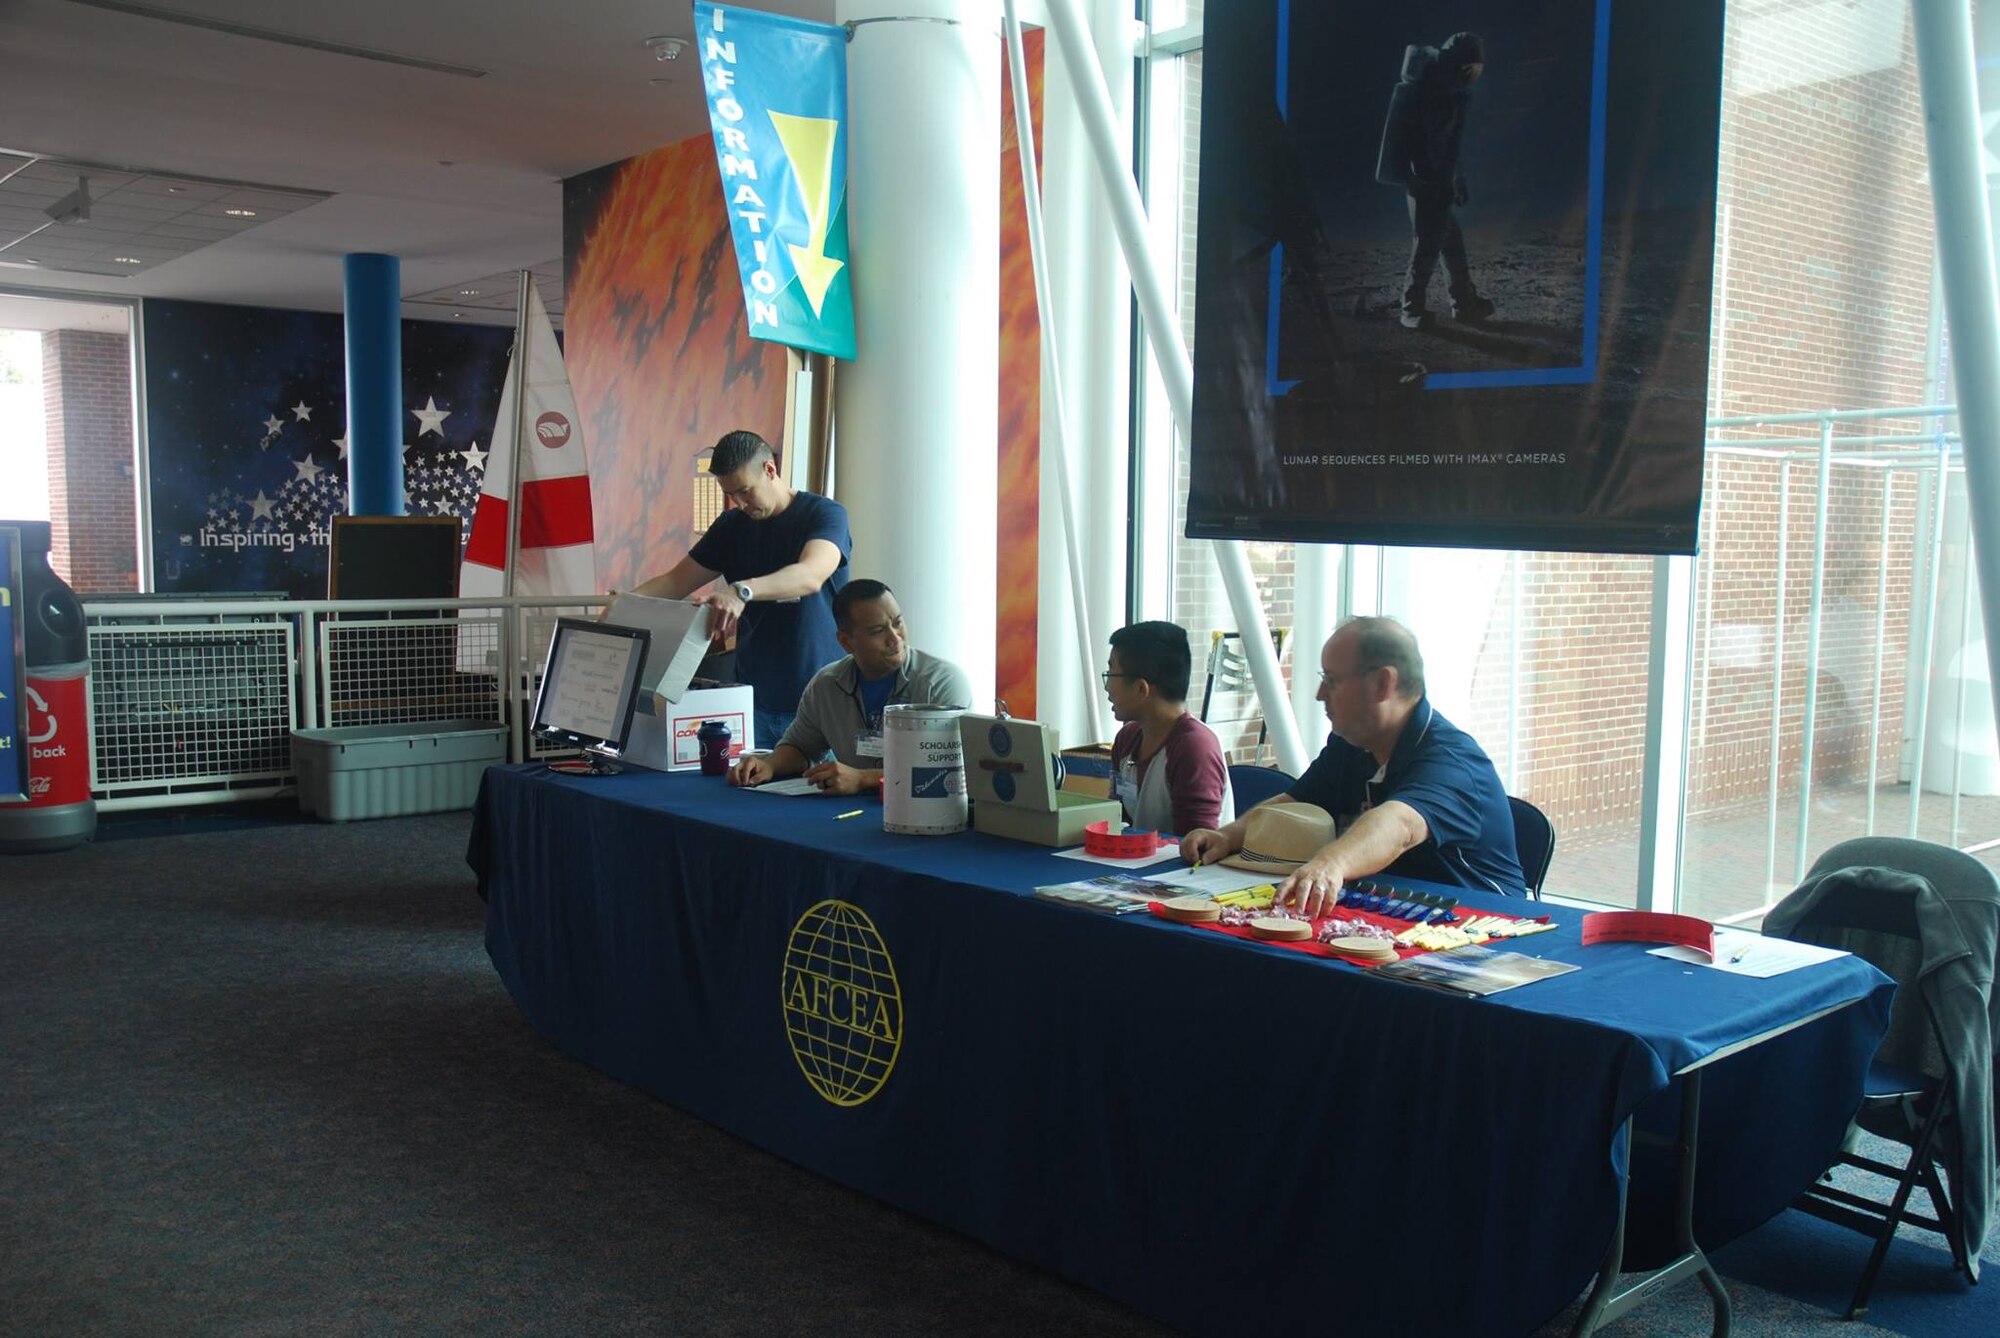 A team of Armed Forces Communications and Electronics Association volunteers set up an information desk at an Annual Science Technology Engineering and Mathematics event at the Virginia Air & Space Center in Hampton, Virginia, Nov. 3, 2018. The event was held as a family-focused outreach opportunity for children and adults of all ages. The Air Force uses these types of events as part of a recruiting effort to spark interest in STEM among children, high school students, and college students. (U.S. Air Force courtesy photo)